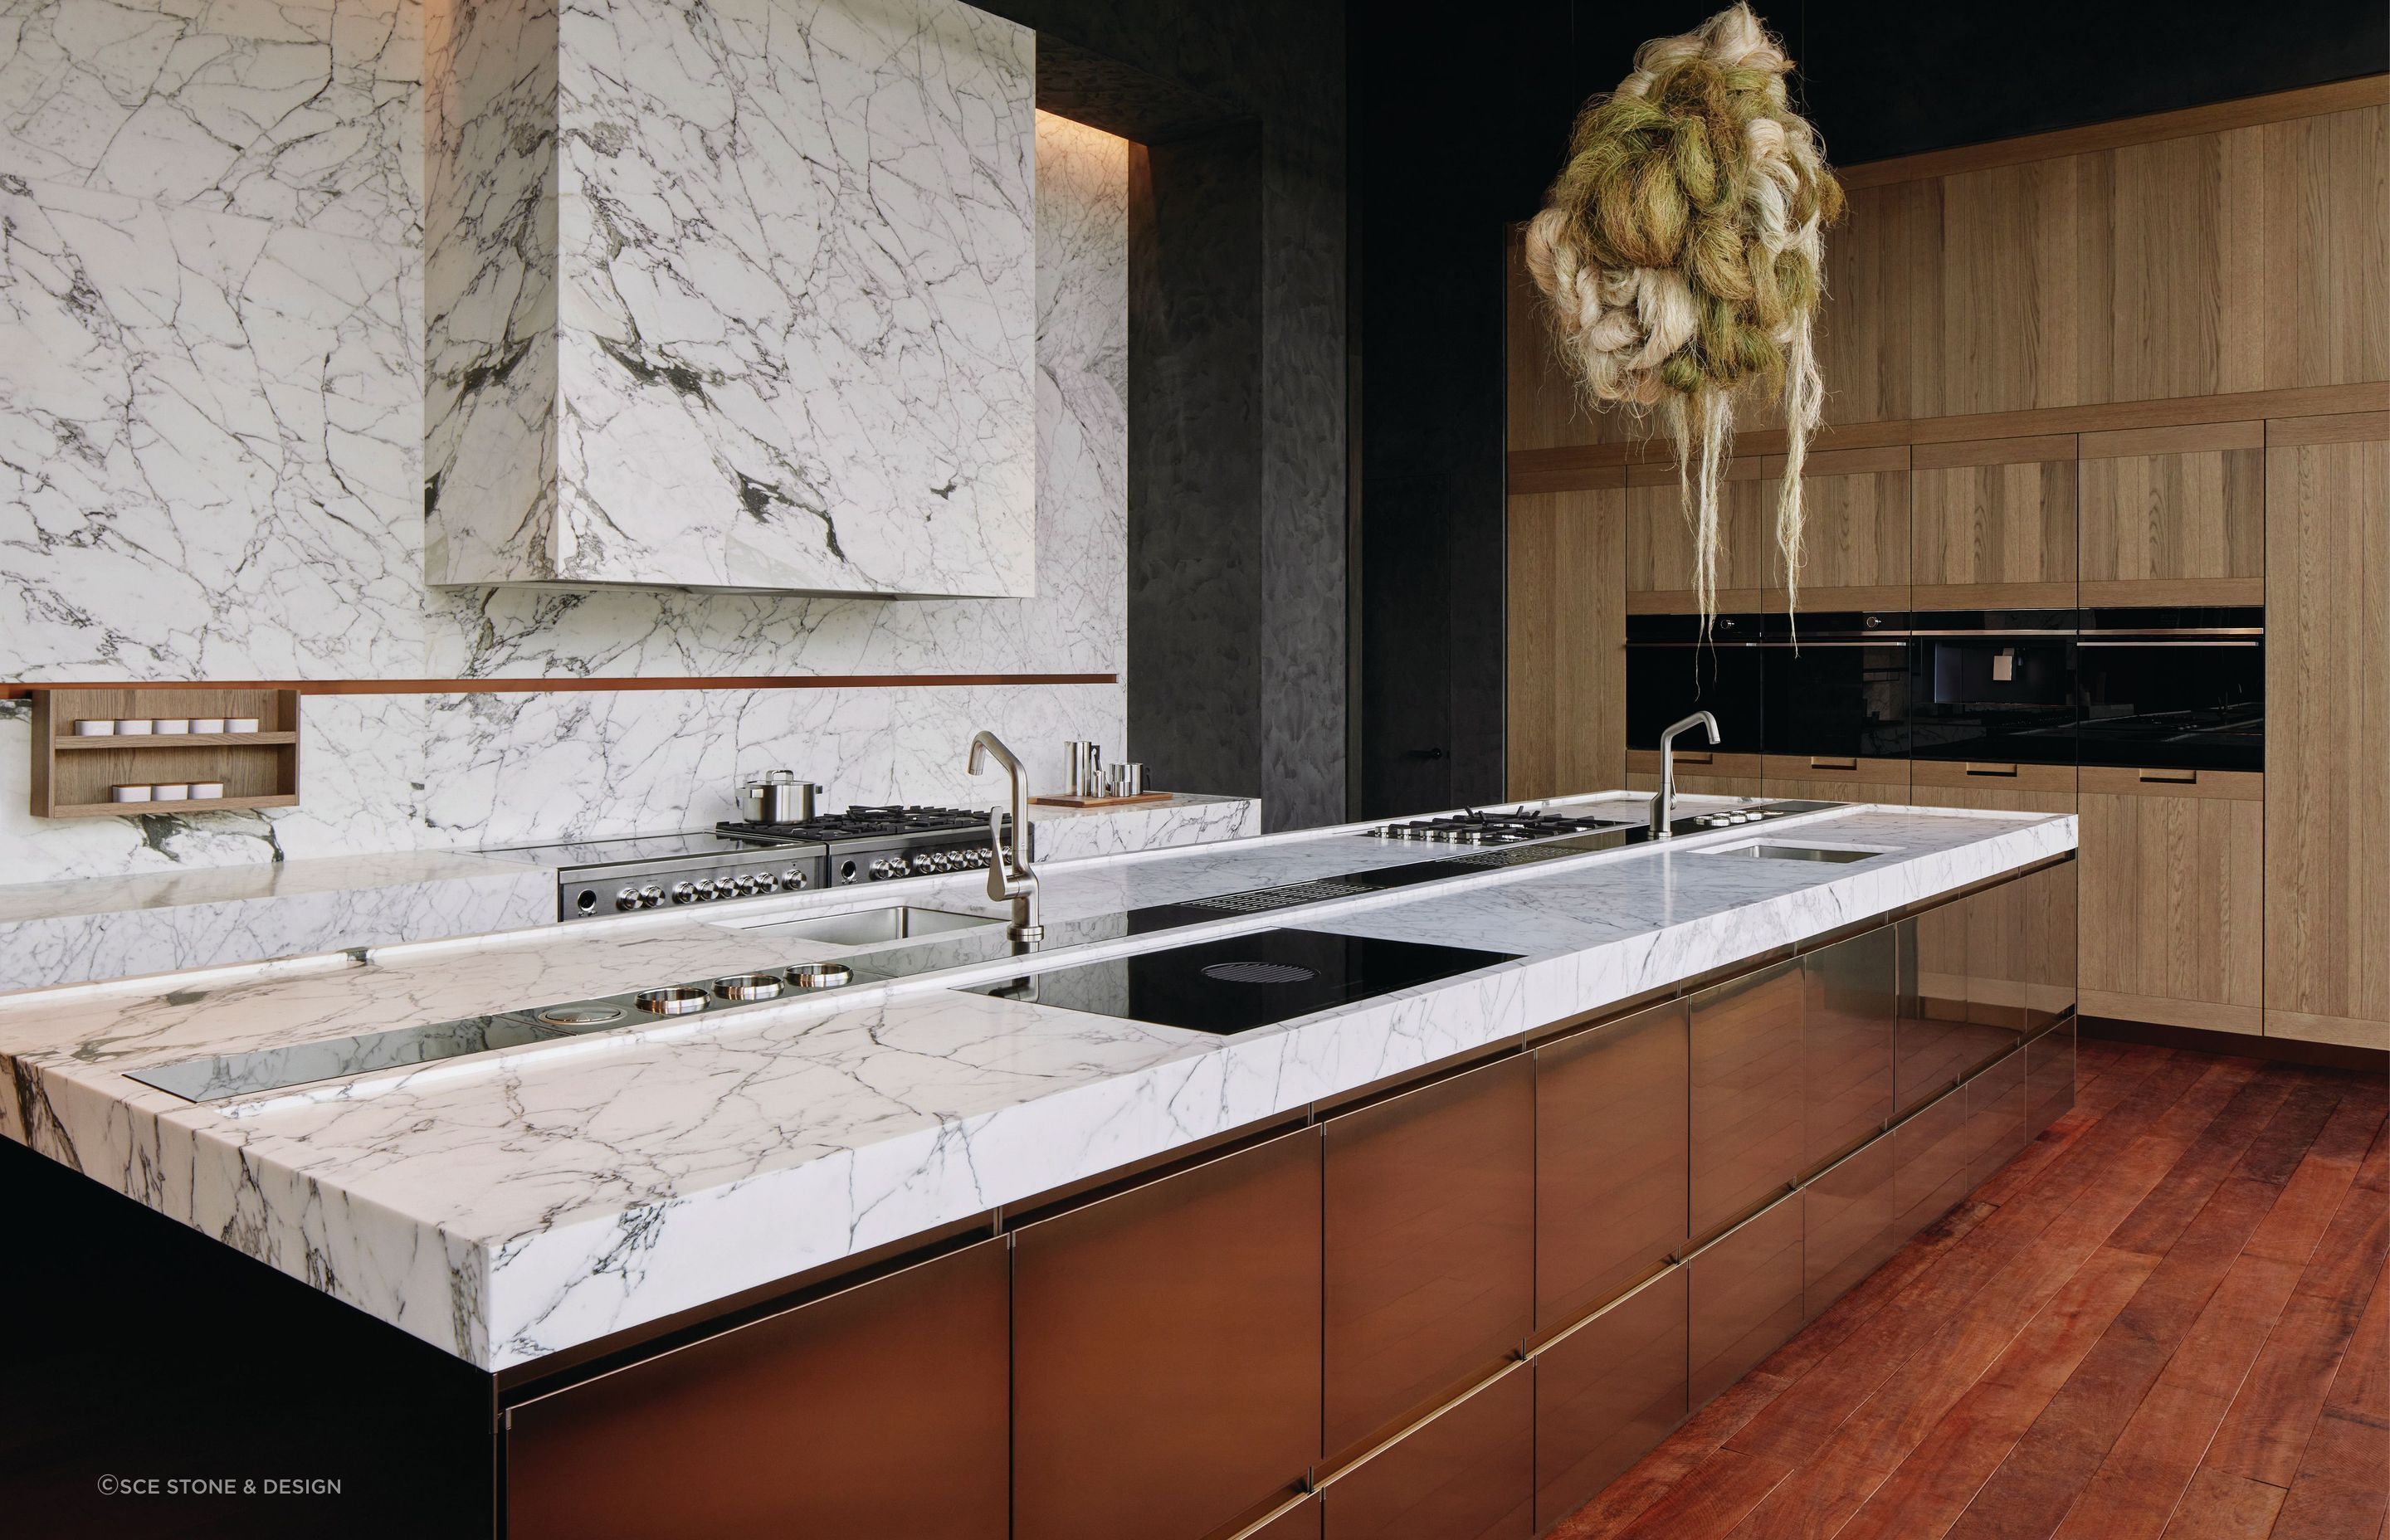 The stunning Arabescato T Marble on full display across a number of kitchen surfaces